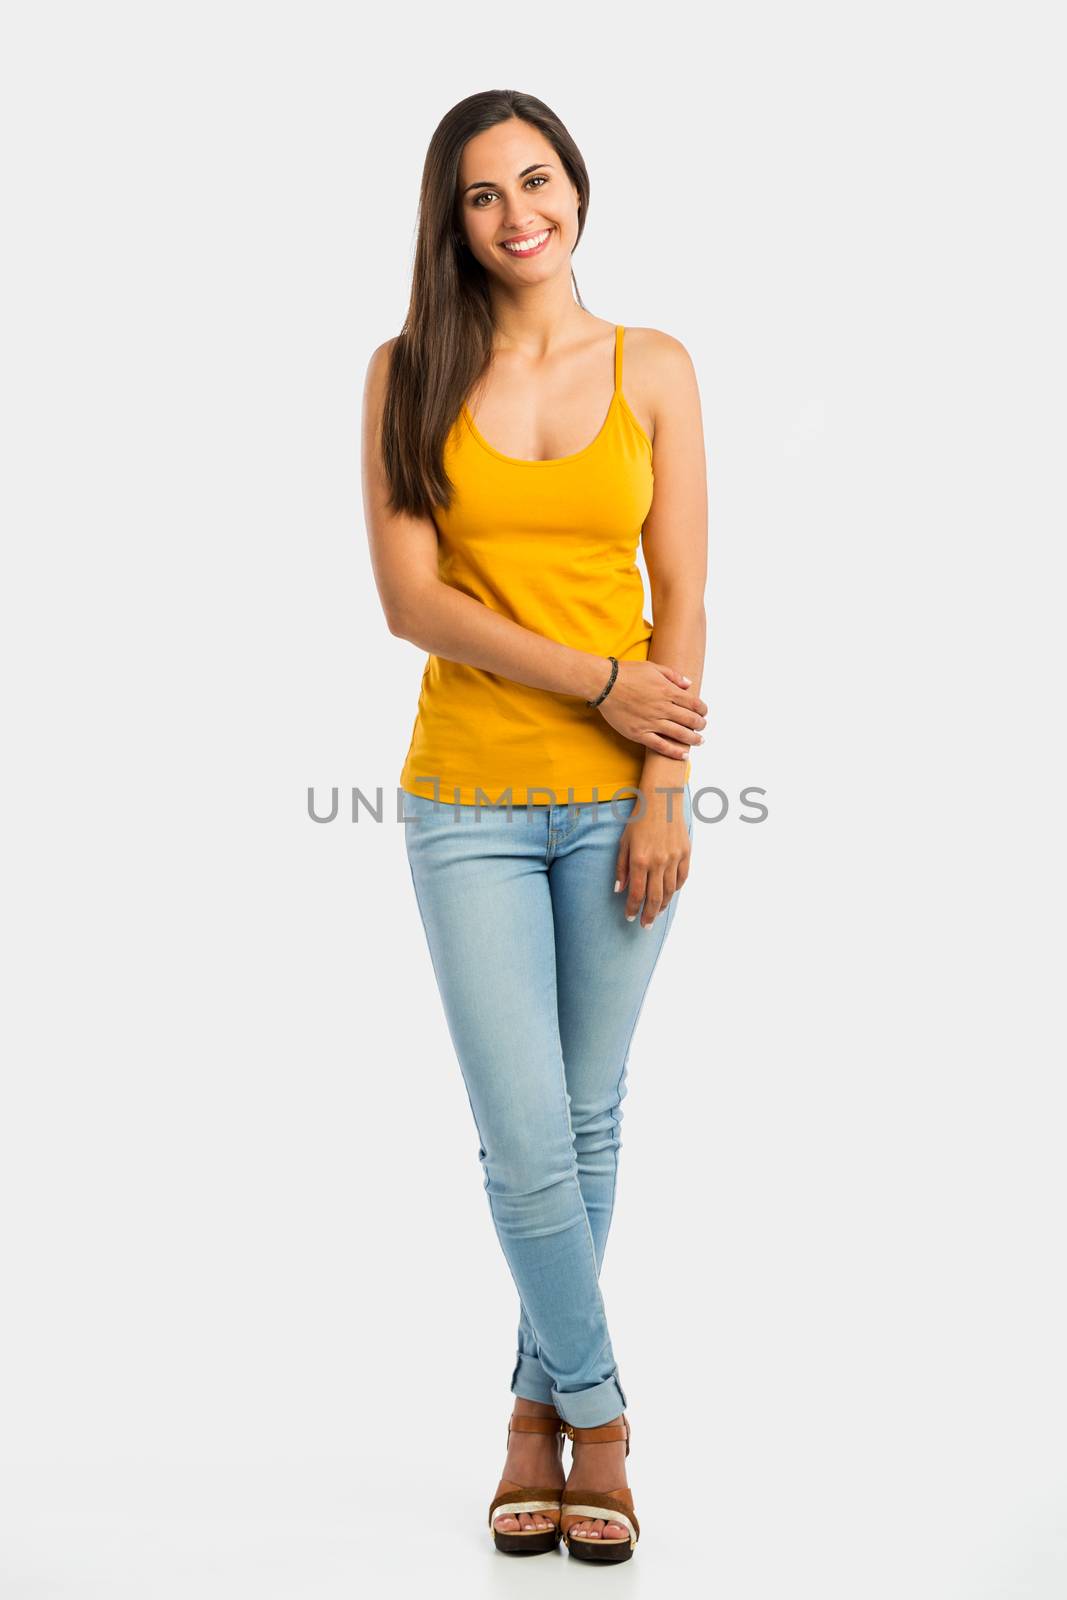 Full length portrait of a beautiful young woman smiling